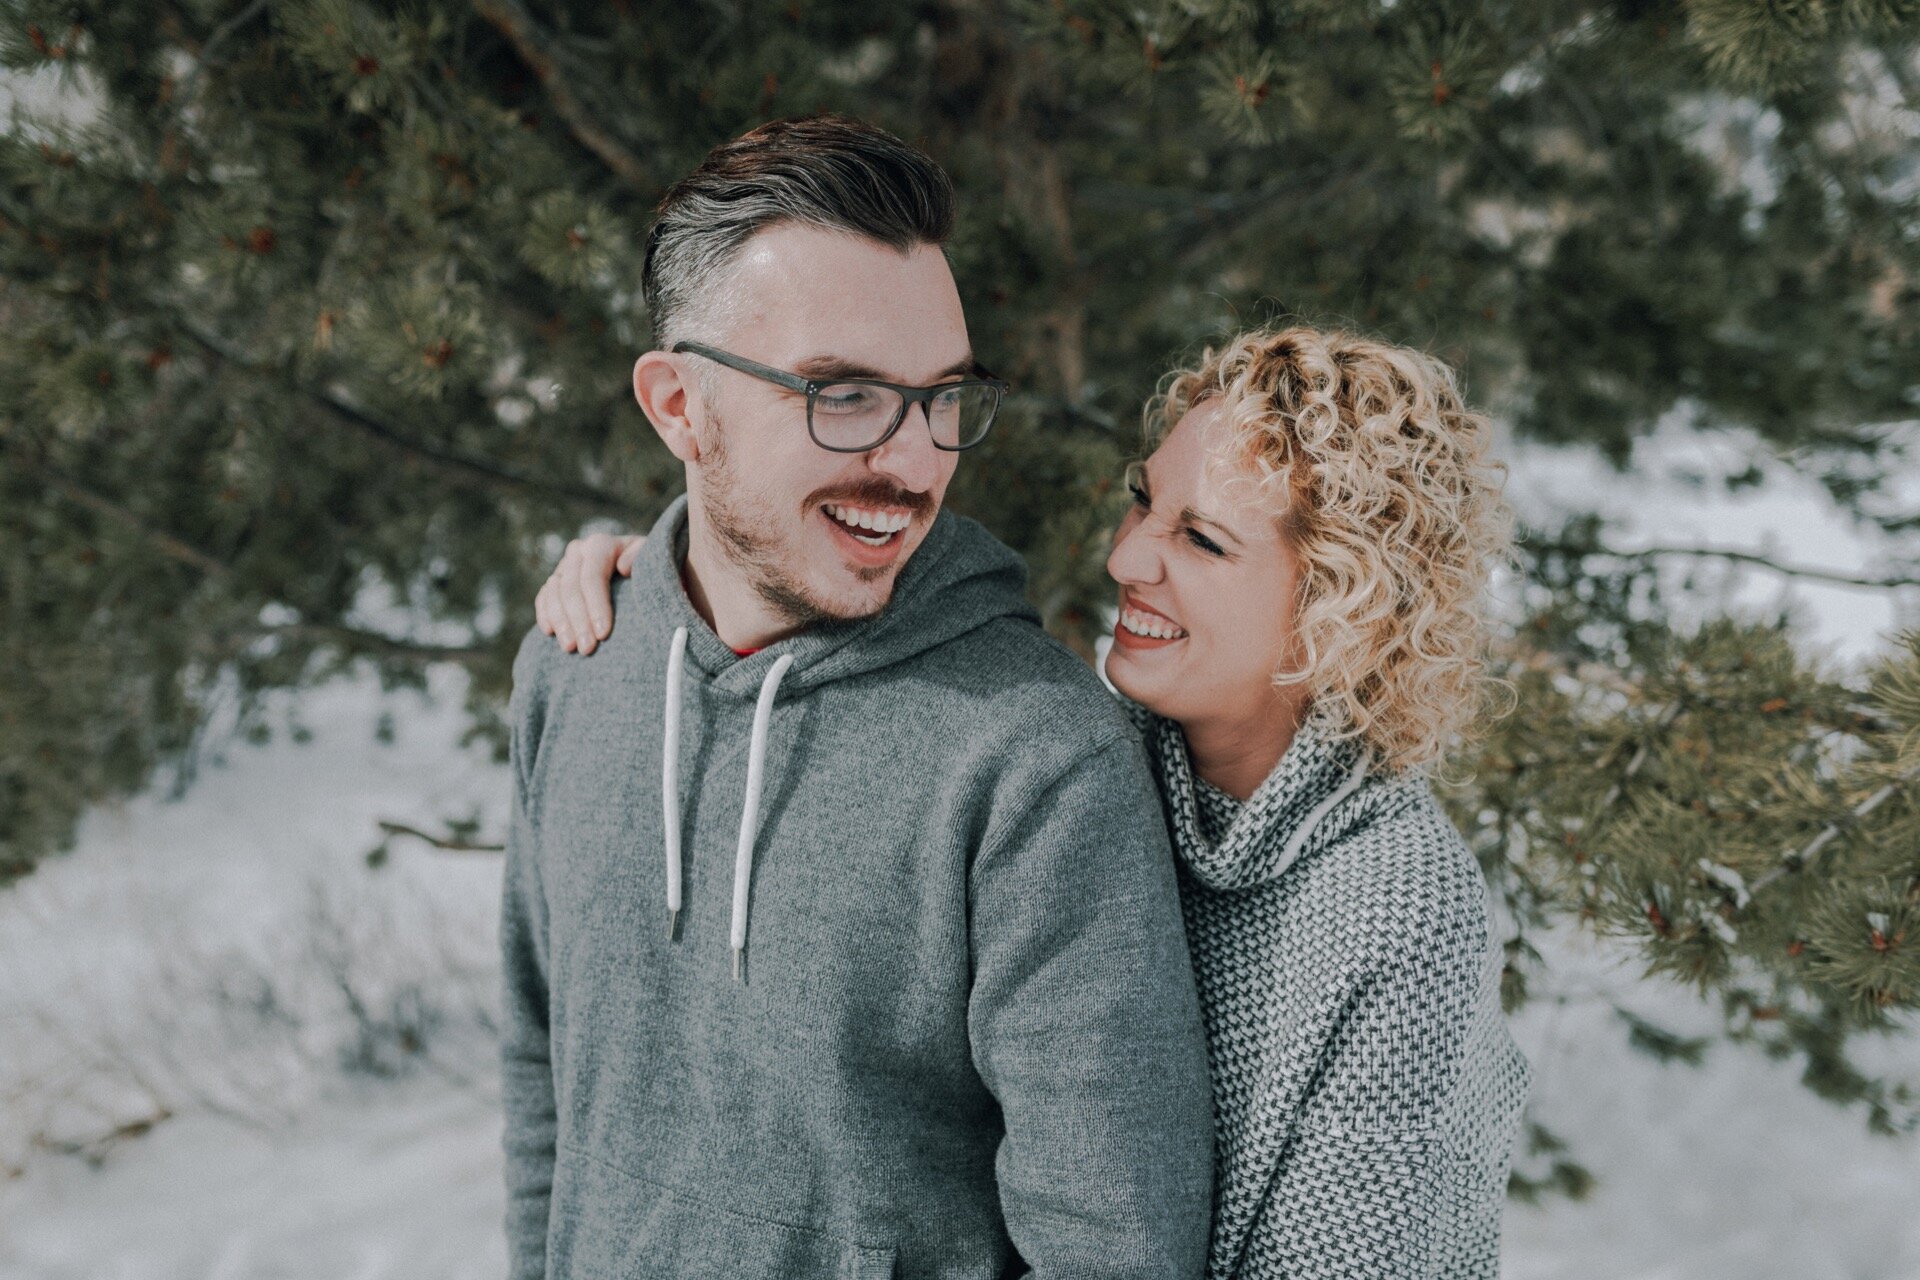 03_Kelsey&Taylor011_frisco_Photographer_engagement_Session_Co_Photography_Hannah_Minnesota_Snowy_Colorado_adventure_Mountain_ampe_engaged.jpg